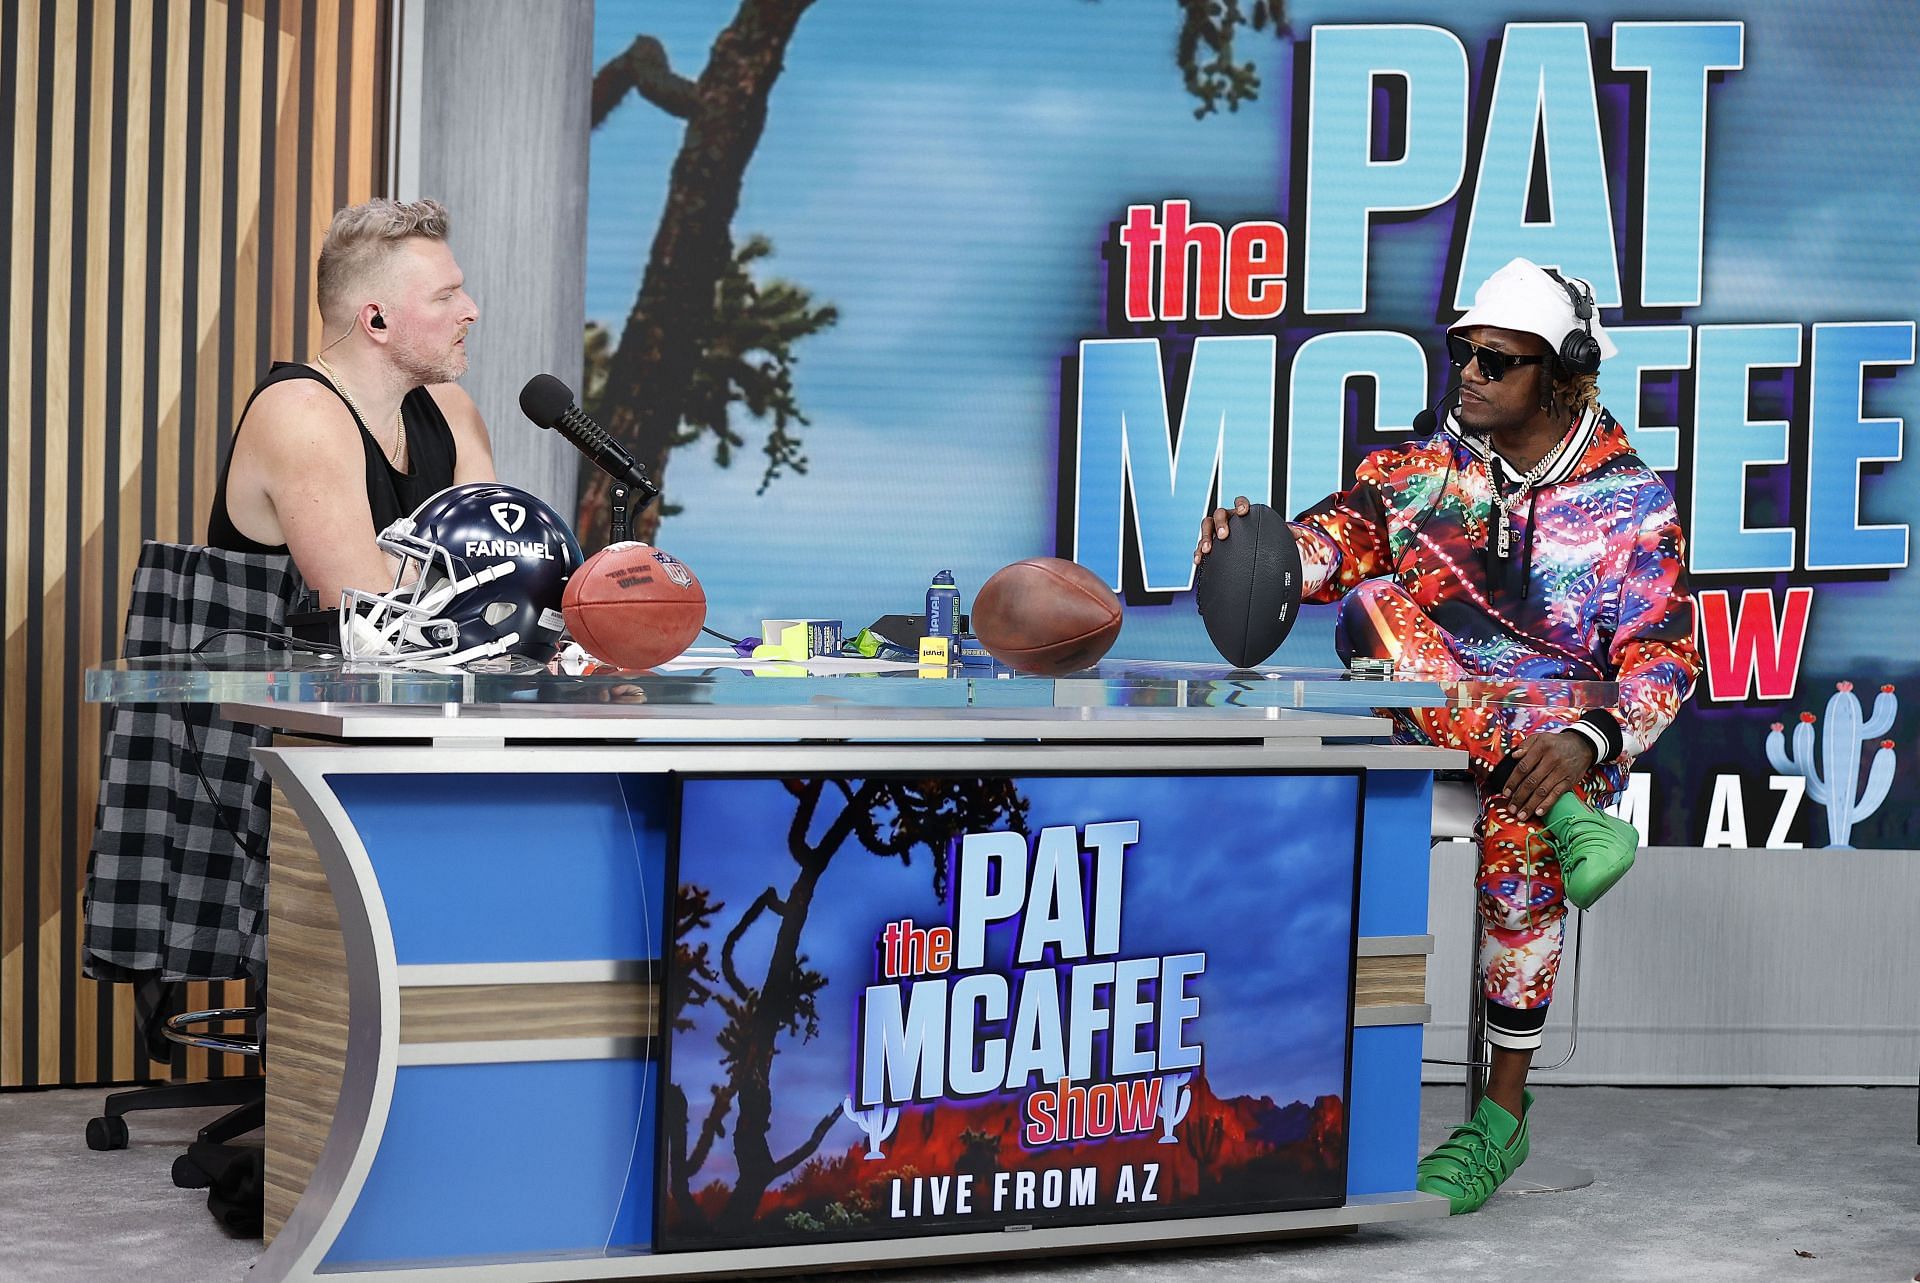 The Pat McAfee Show is heading to ESPN